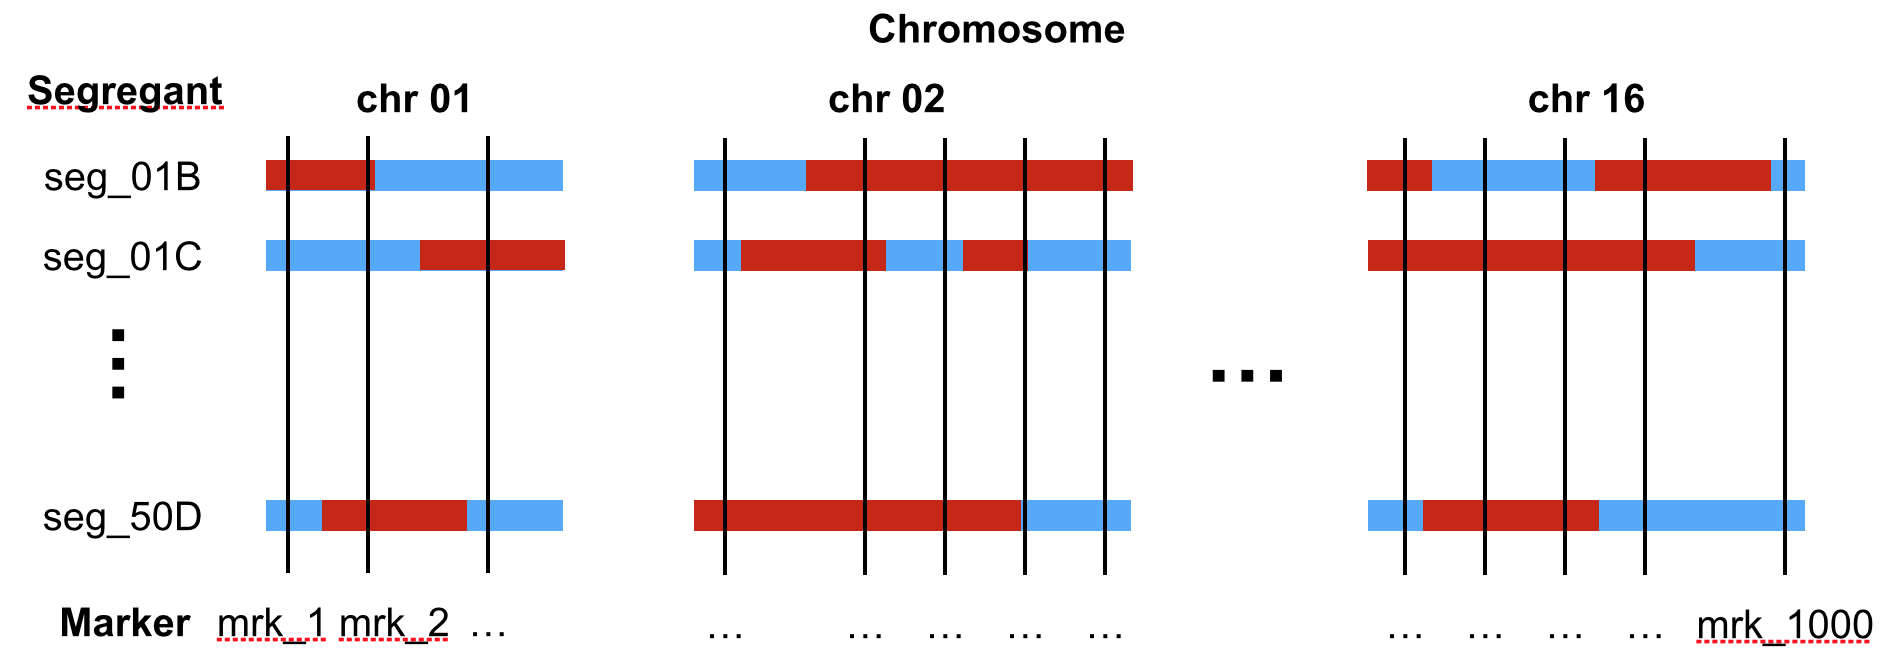 Sketch of the genotype of segregants (rows) across the 16 chromosomes. The genotypes are provided at 1,000 genomic positions (called markers, vertical line). The colors indicate the genotype (blue: Lab strain, red: Wild isolate).